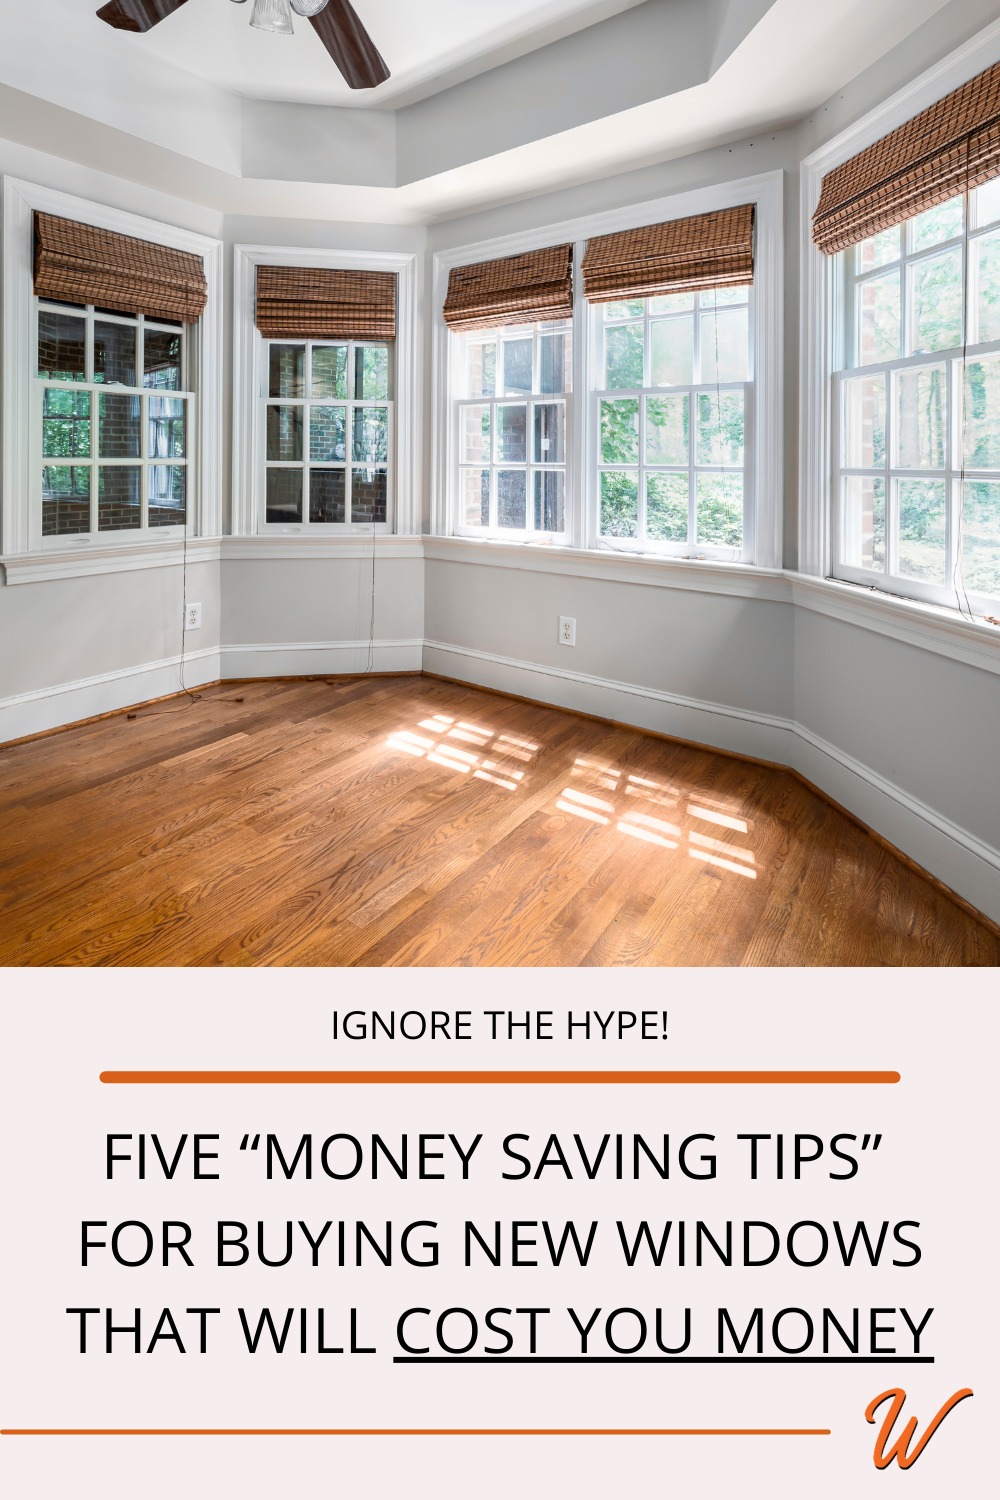 Empty breakfast nook with new replacement windows captioned with "Ignore the hype! Five "money saving tips" for buying new windows that will cost you money.